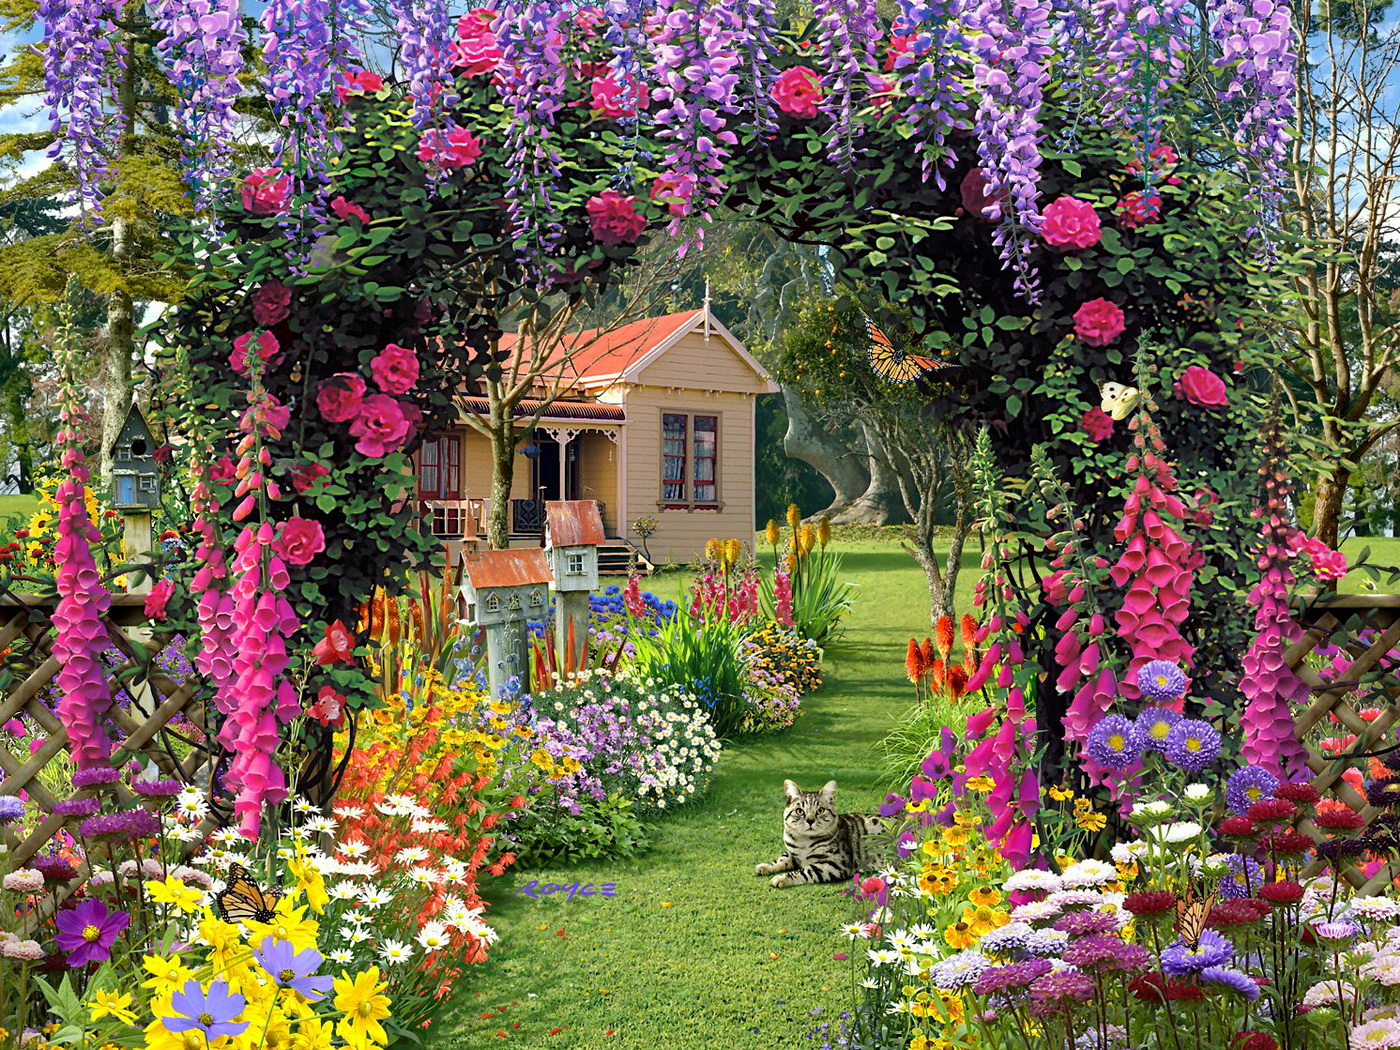 Flower gardens with various types of flowers